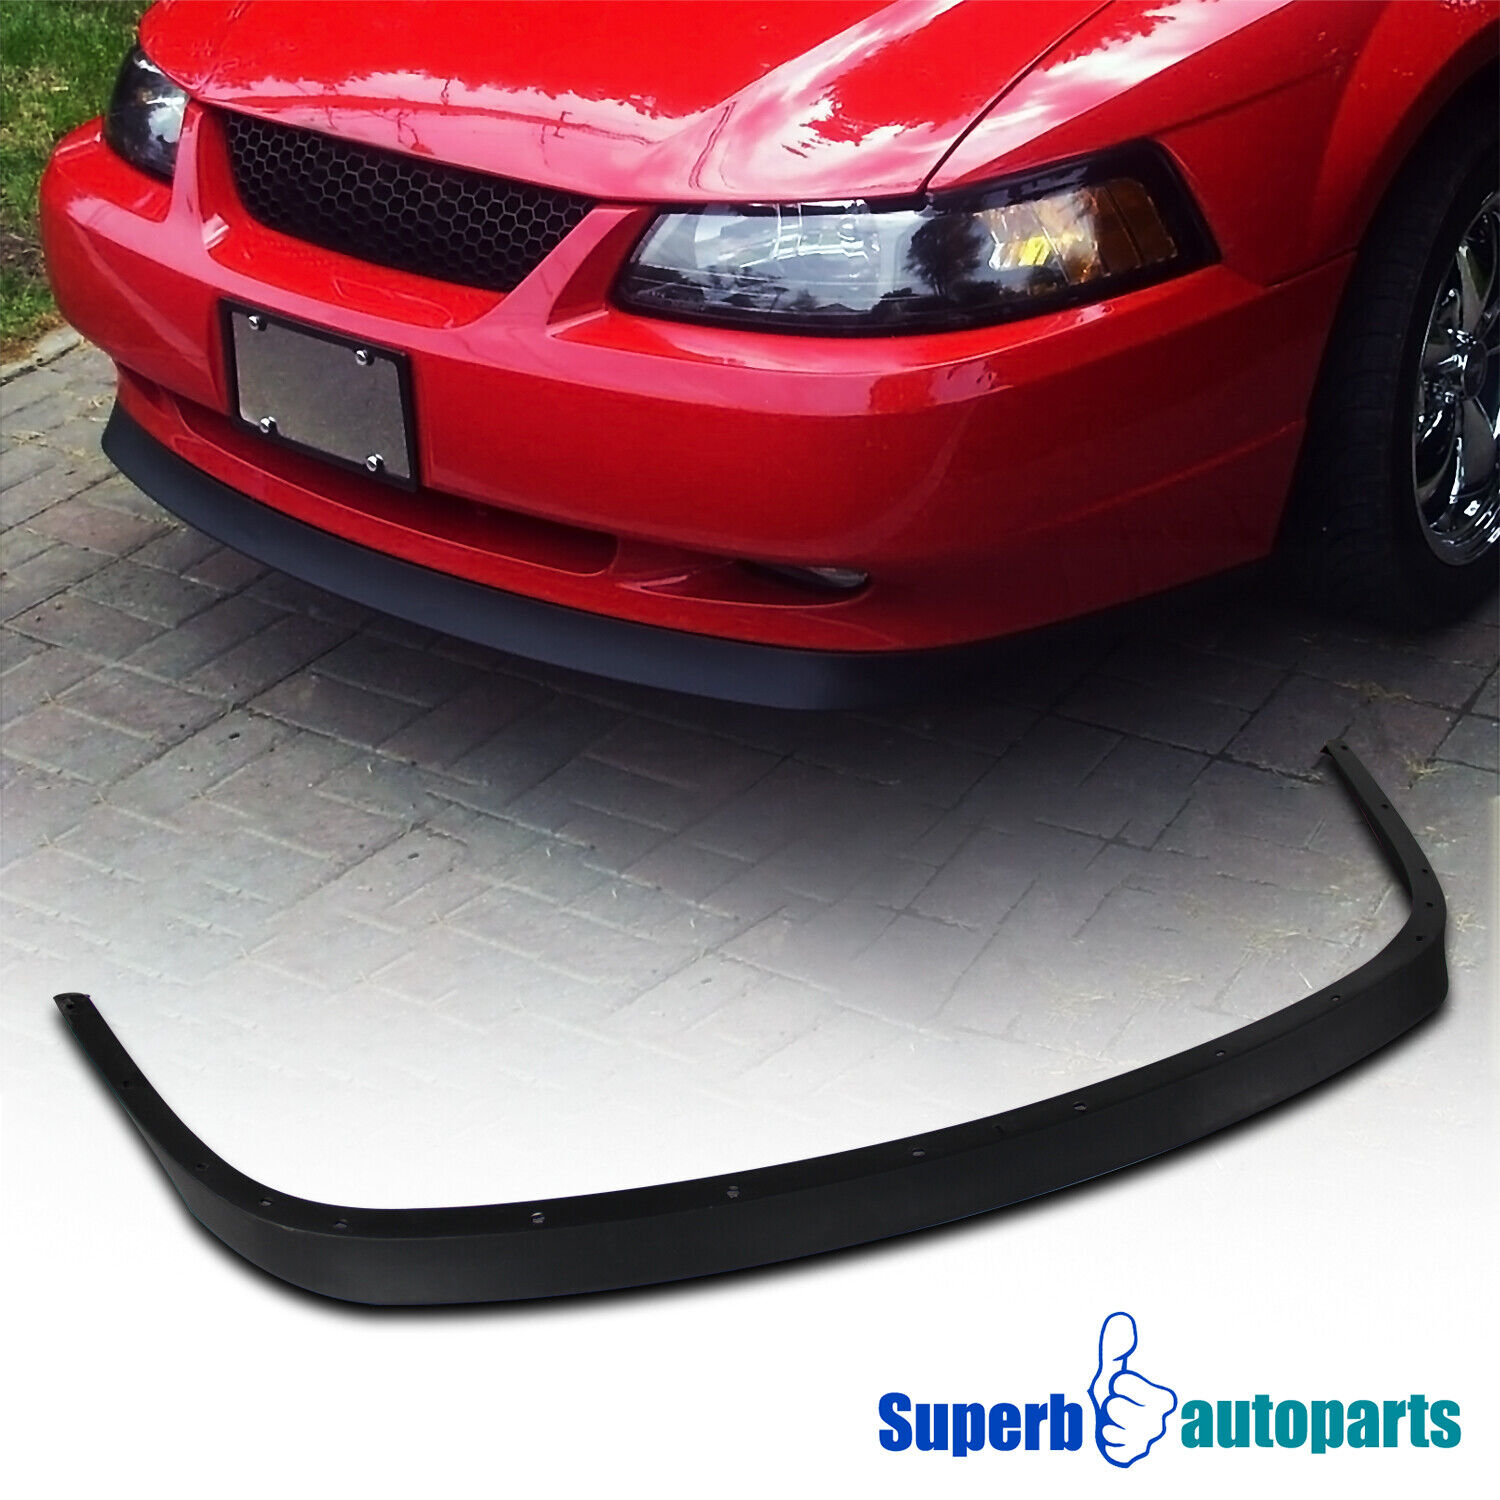 Fits 1999-2004 Ford Mustang V8 GT Front Bumper Lip ABS Spoiler Balck Replacement